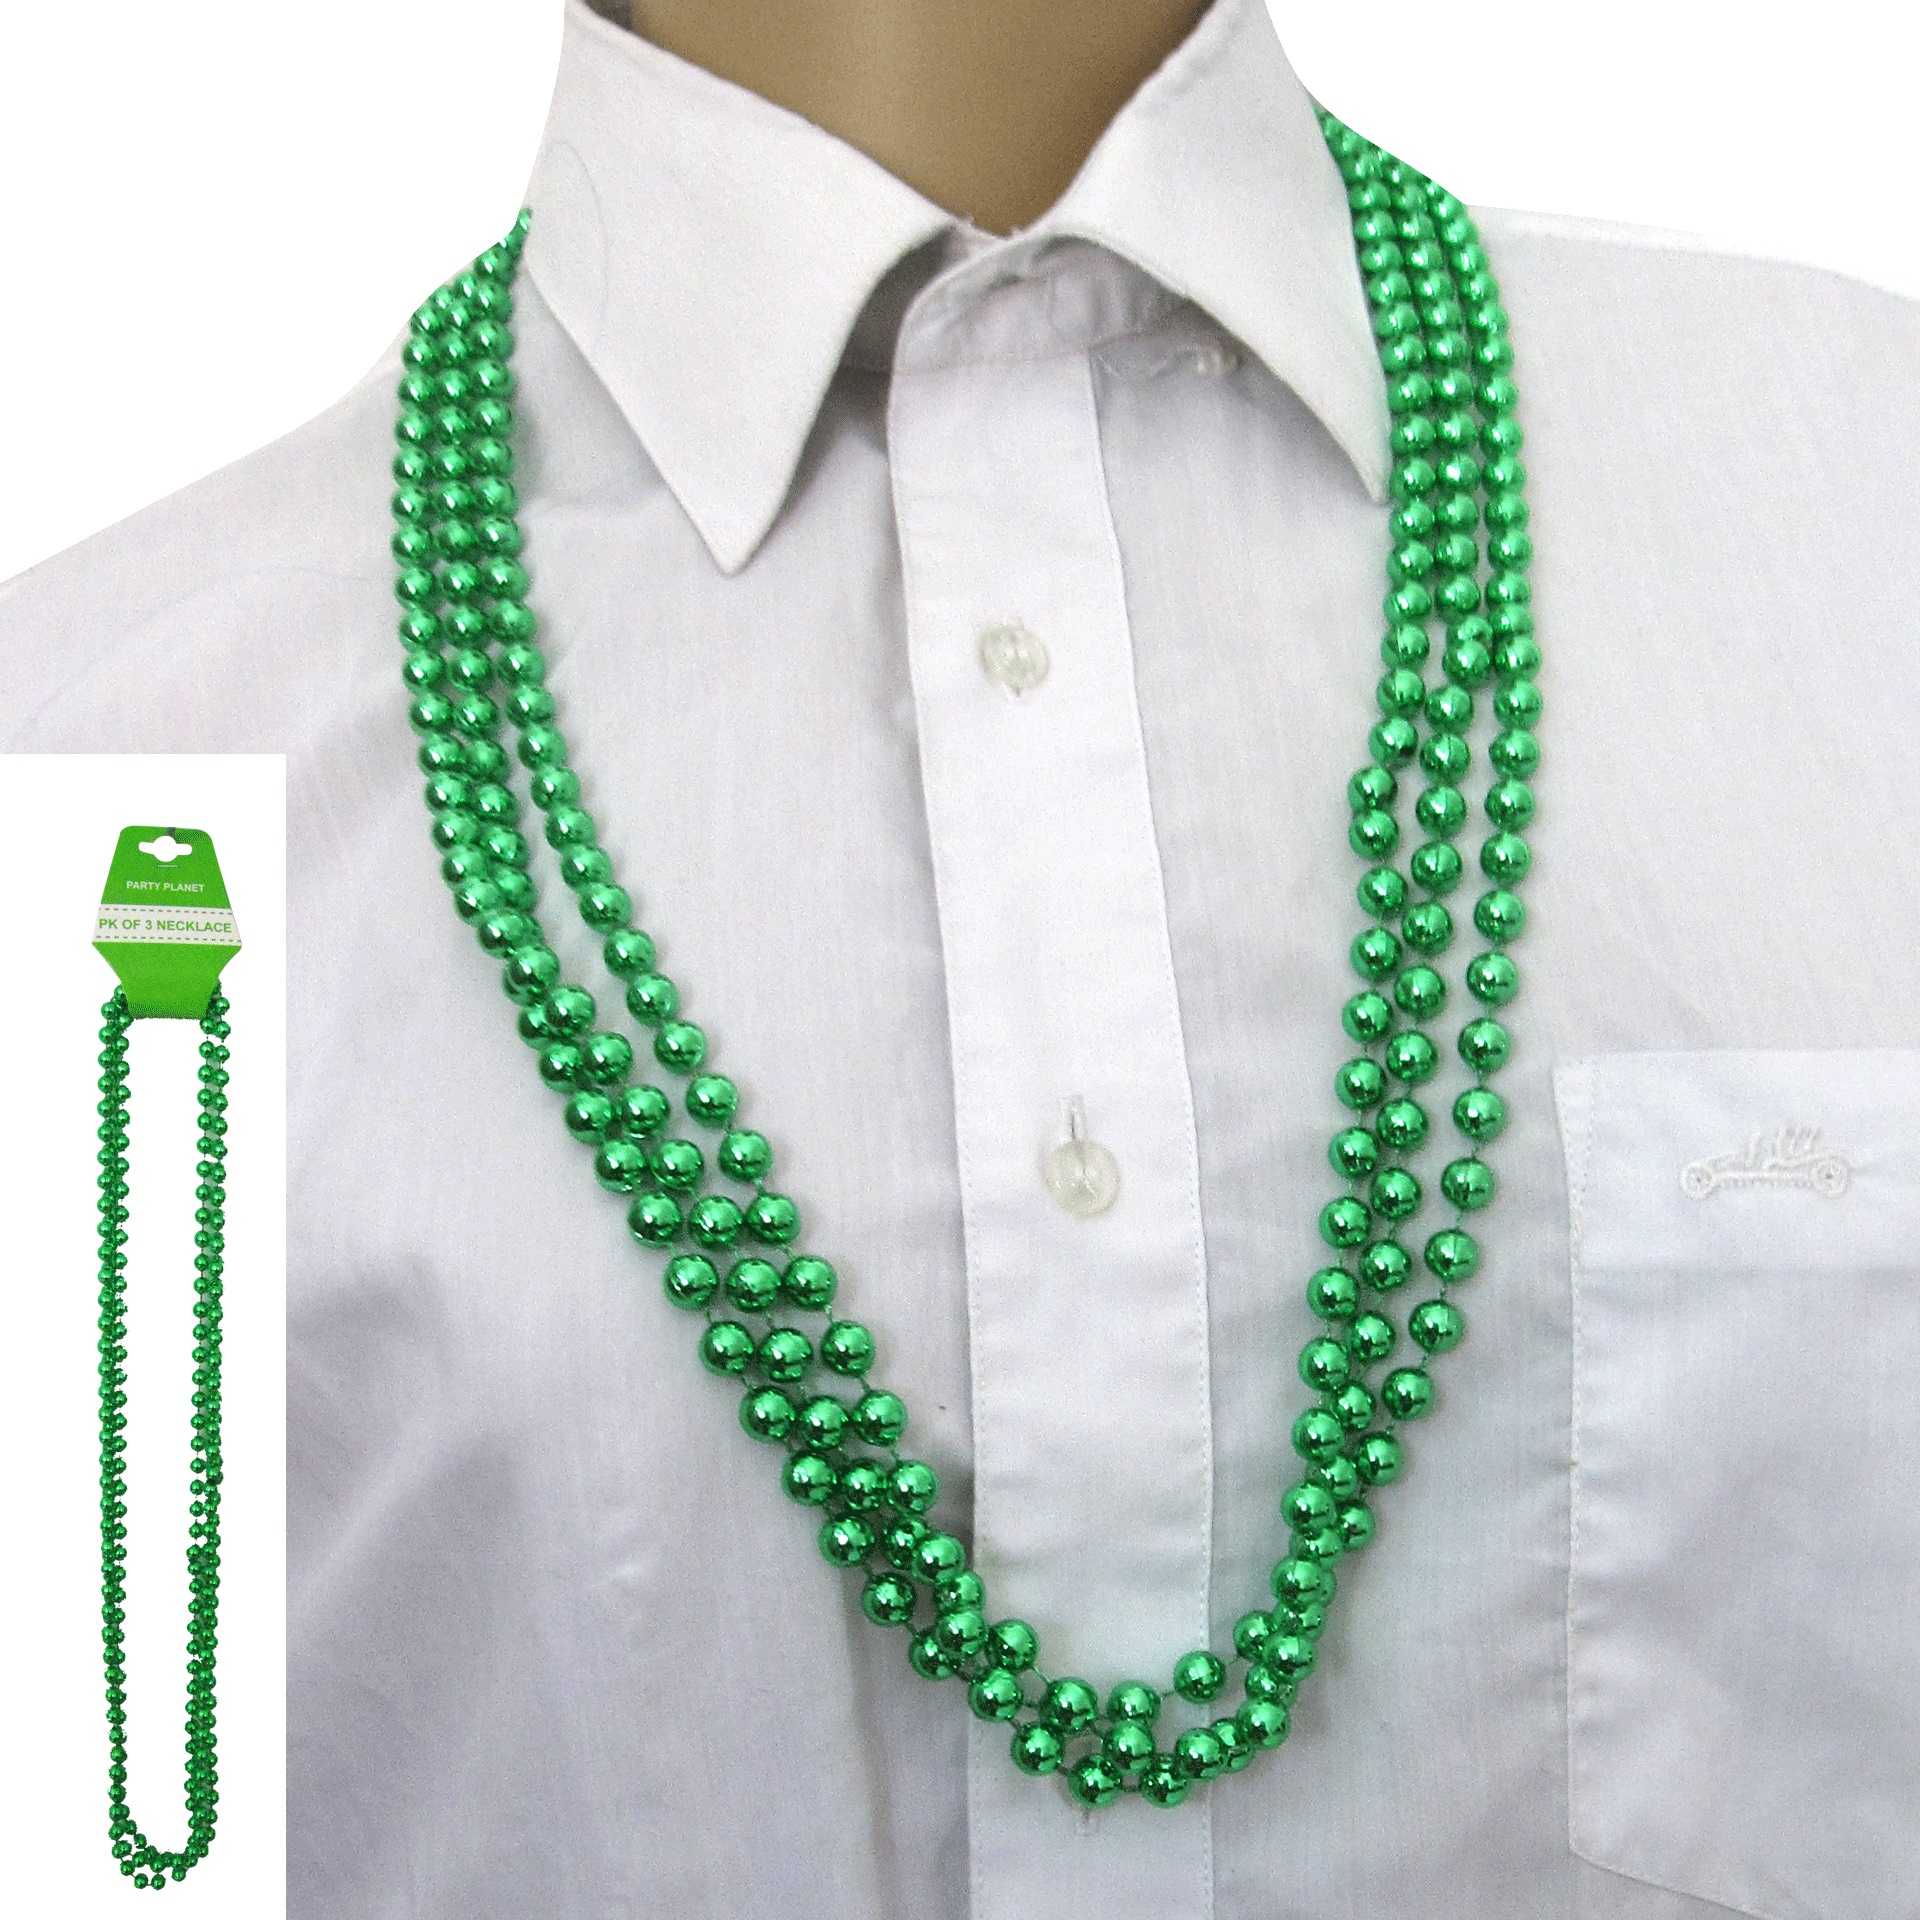 View Party Necklace Beaded Green